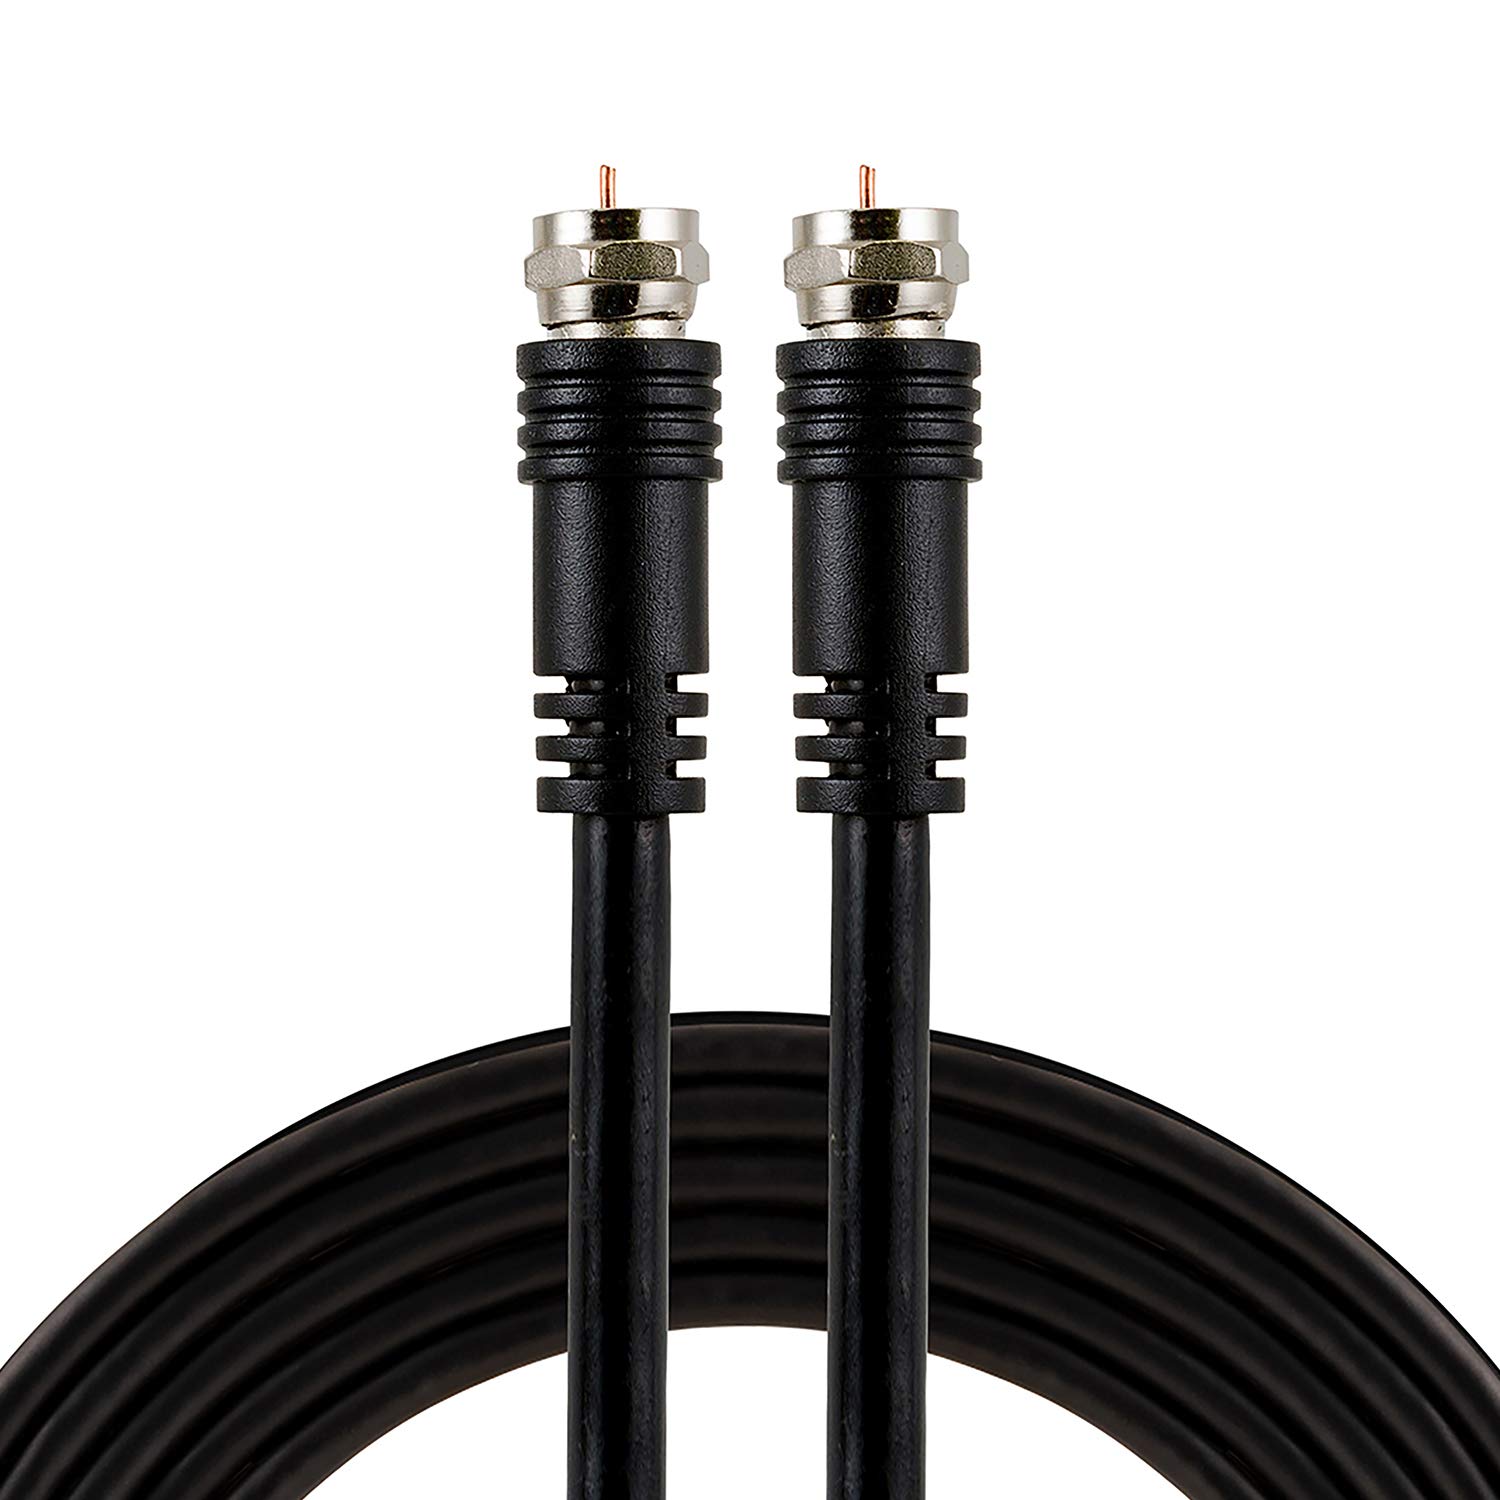 GE RG59 Coaxial Cable 25ft. (7.6m), Black, F-Type Connections Jacks, Low Loss, Double Shielded Coax Cable, Input/Output, Ideal for Antennas, DVR, VCR, Satellite to TV, 23210